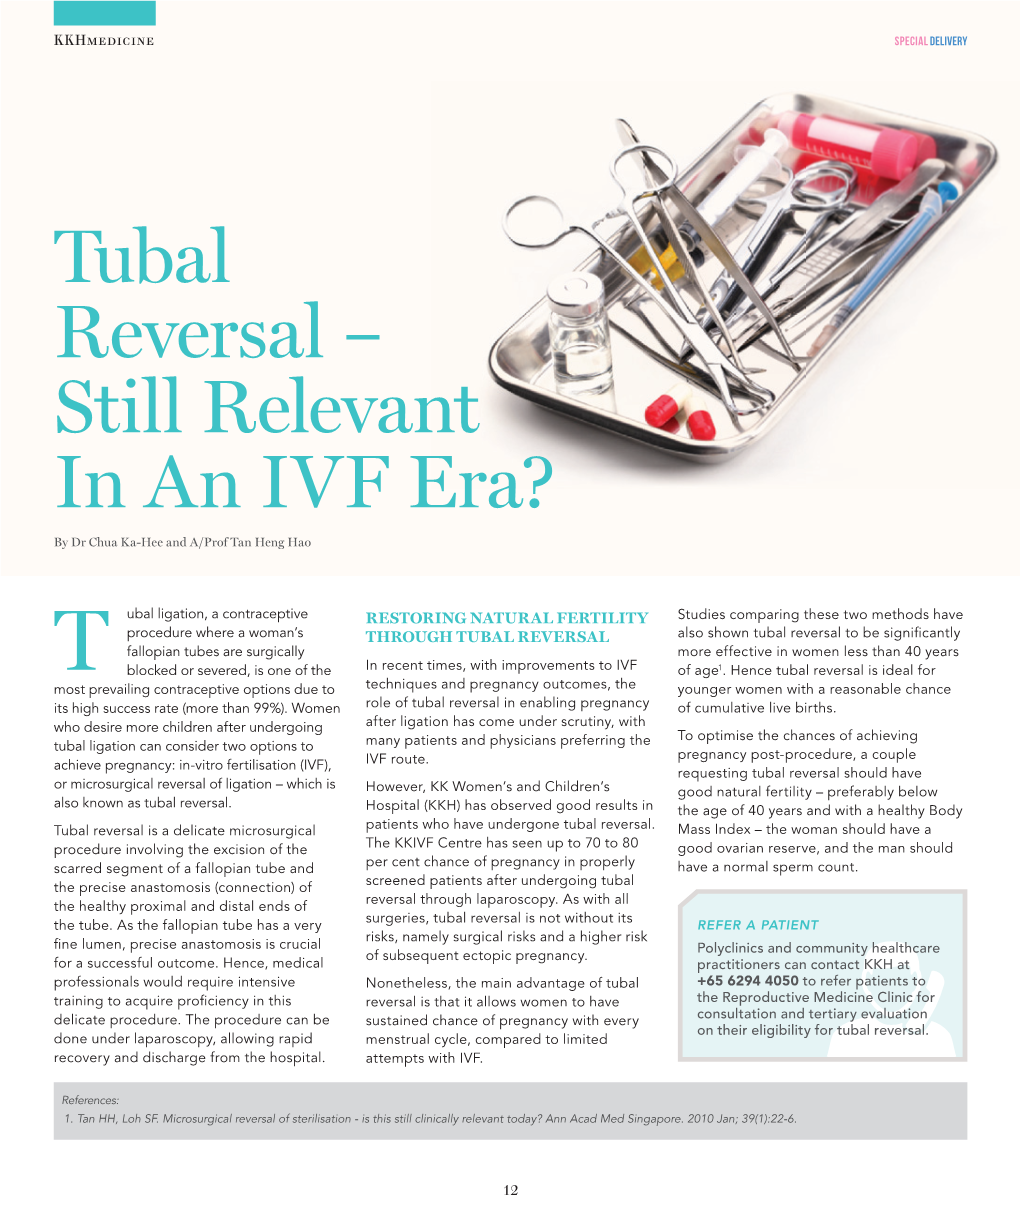 Tubal Reversal – Still Relevant in an IVF Era? by Dr Chua Ka-Hee and A/Prof Tan Heng Hao